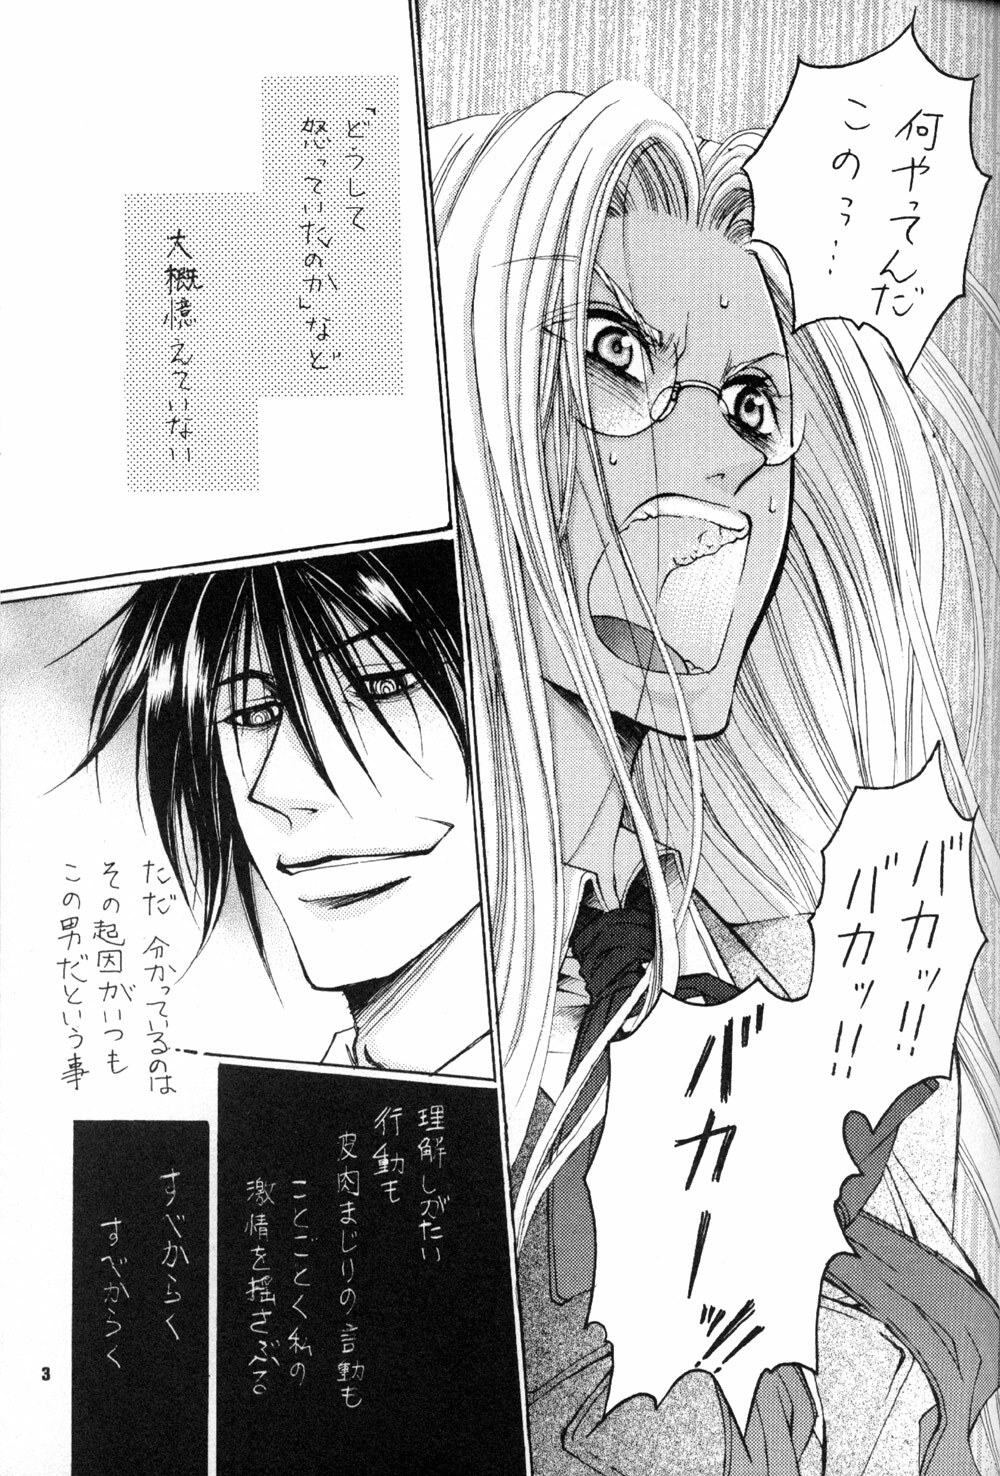 The Long Tunnel of Wanting You (Hellsing) page 3 full